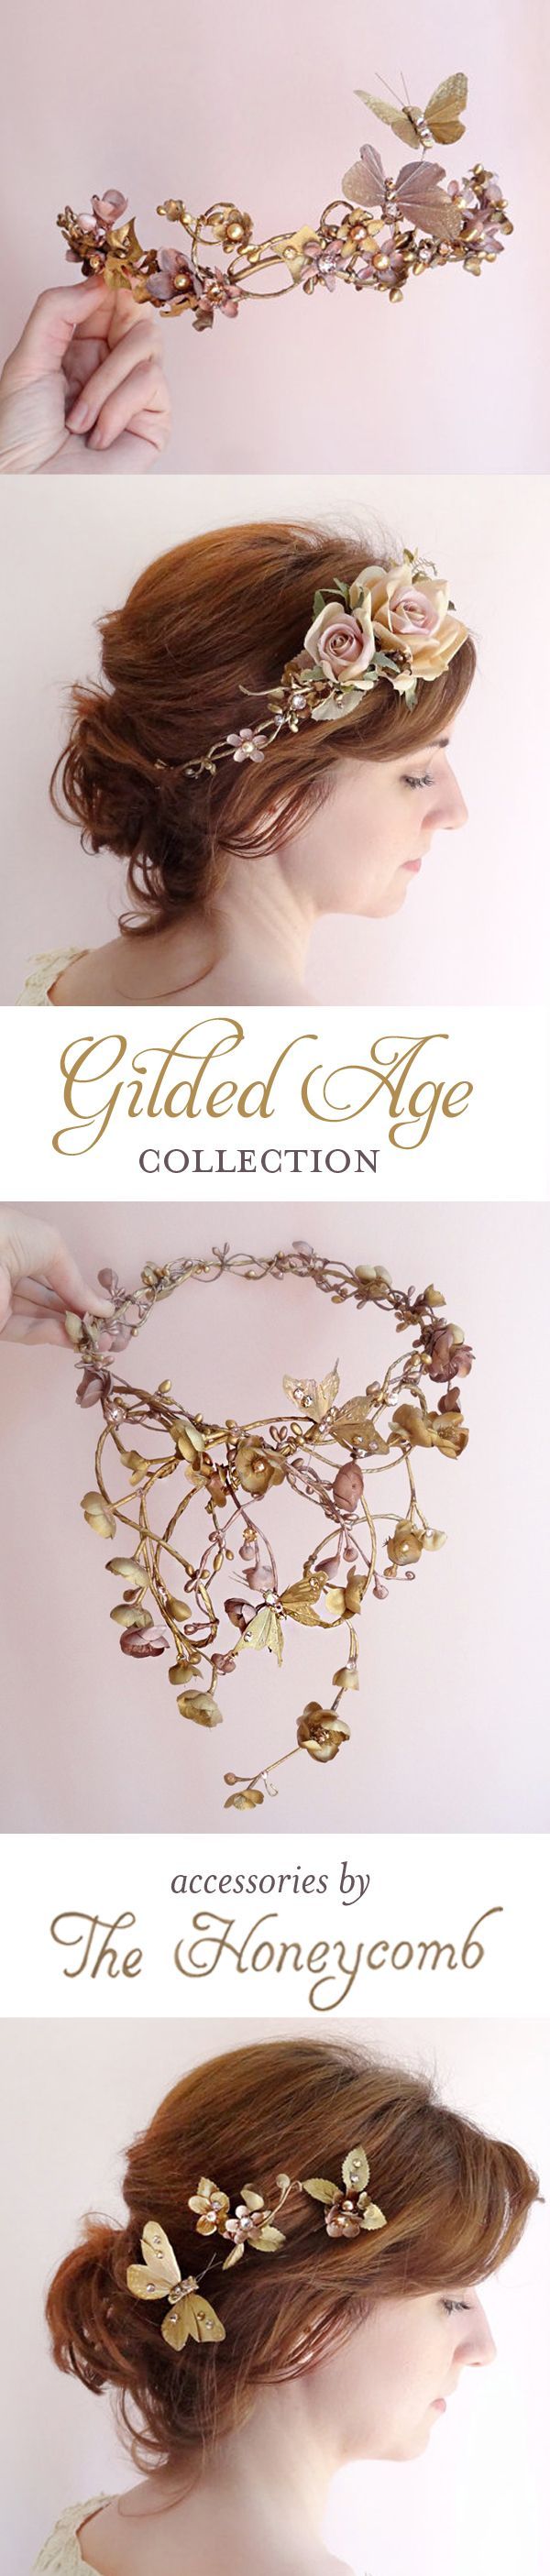 Bronze metallic hair accessories with gilded butterflies and Swarovski crystals and pearls. Luxurious stat